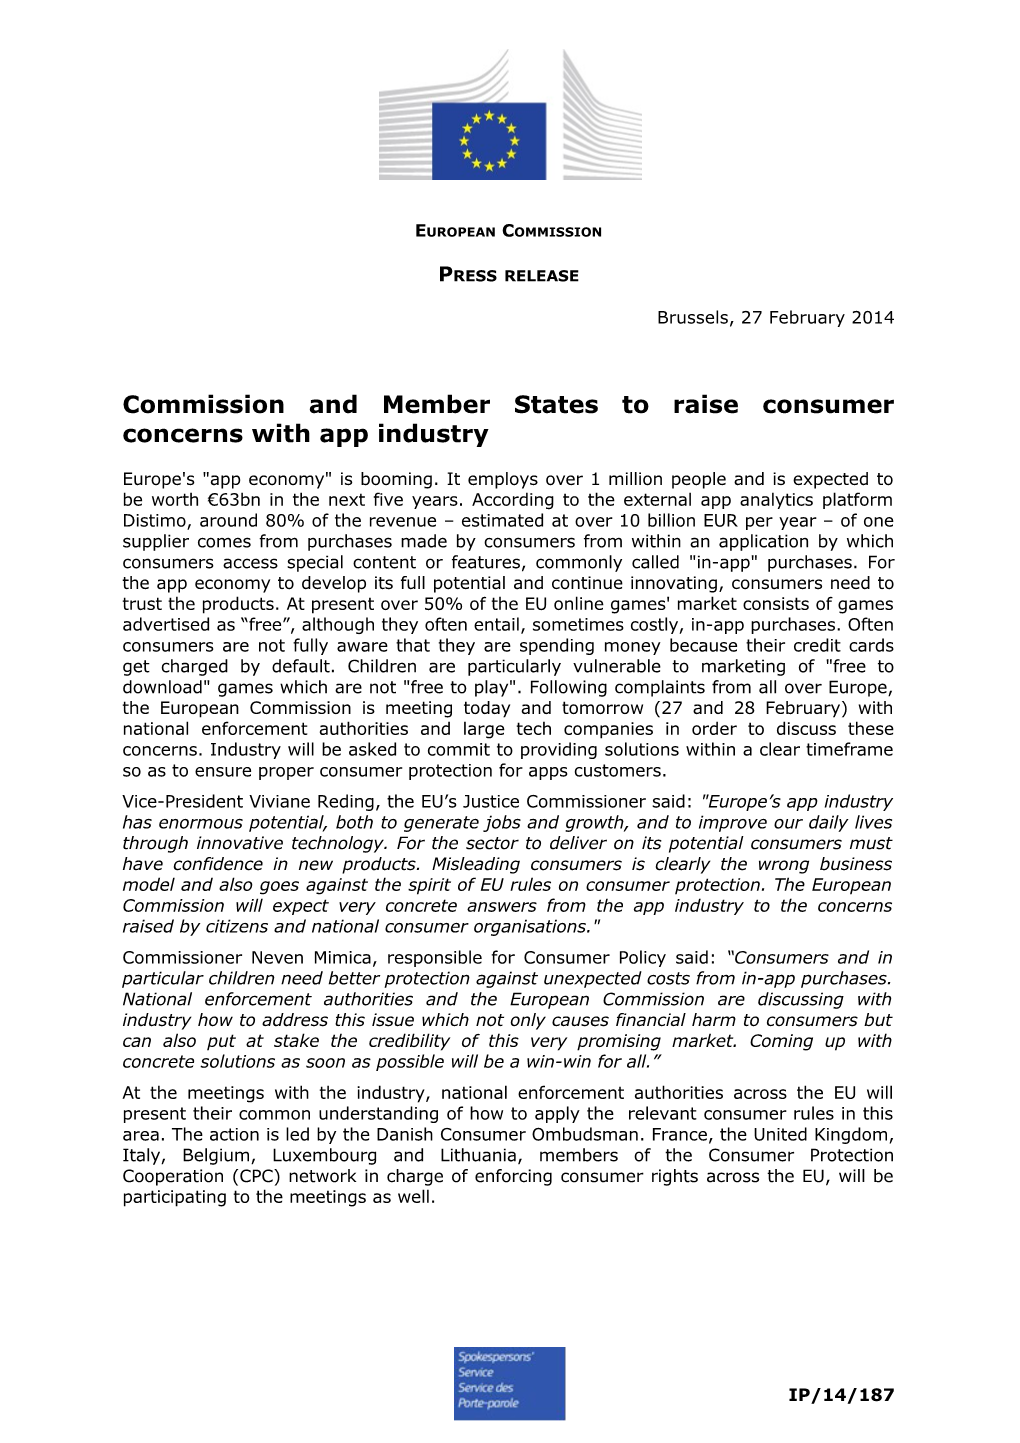 Commission and Member States to Raiseconsumer Concerns with App Industry